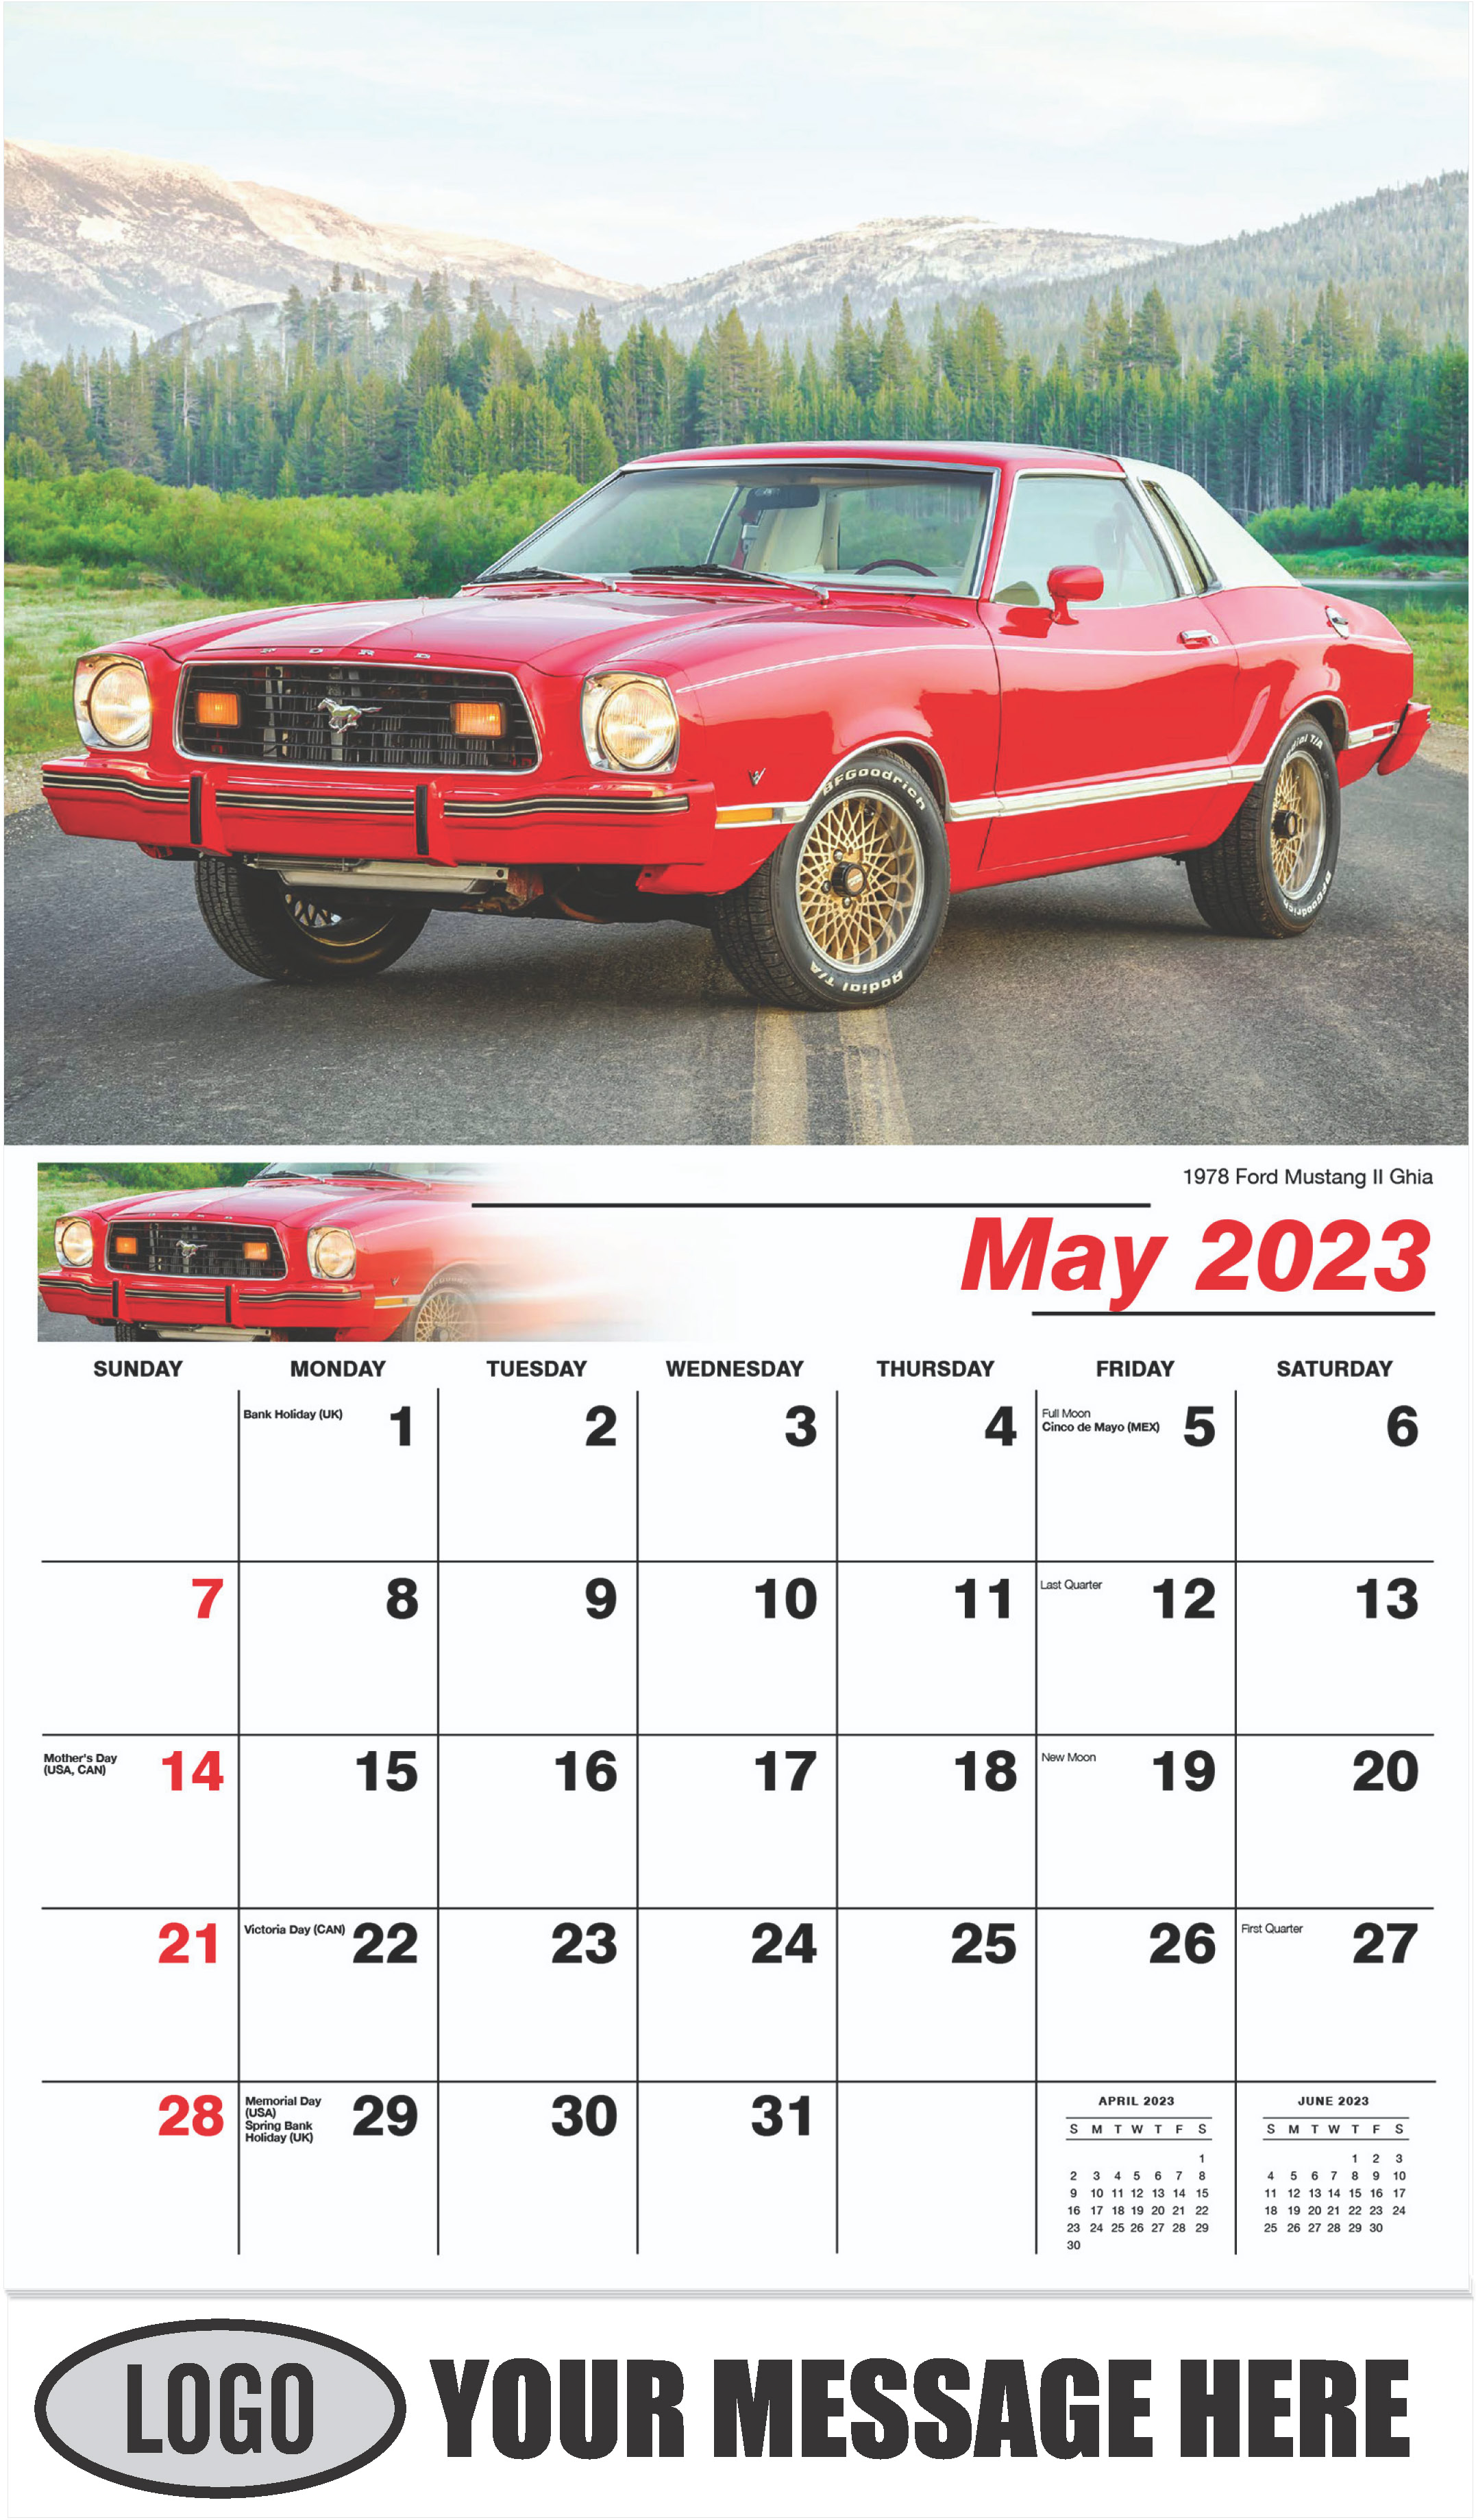 1978 Ford Mustang II Ghia - May - Henry's Heritage Ford Cars 2023 Promotional Calendar